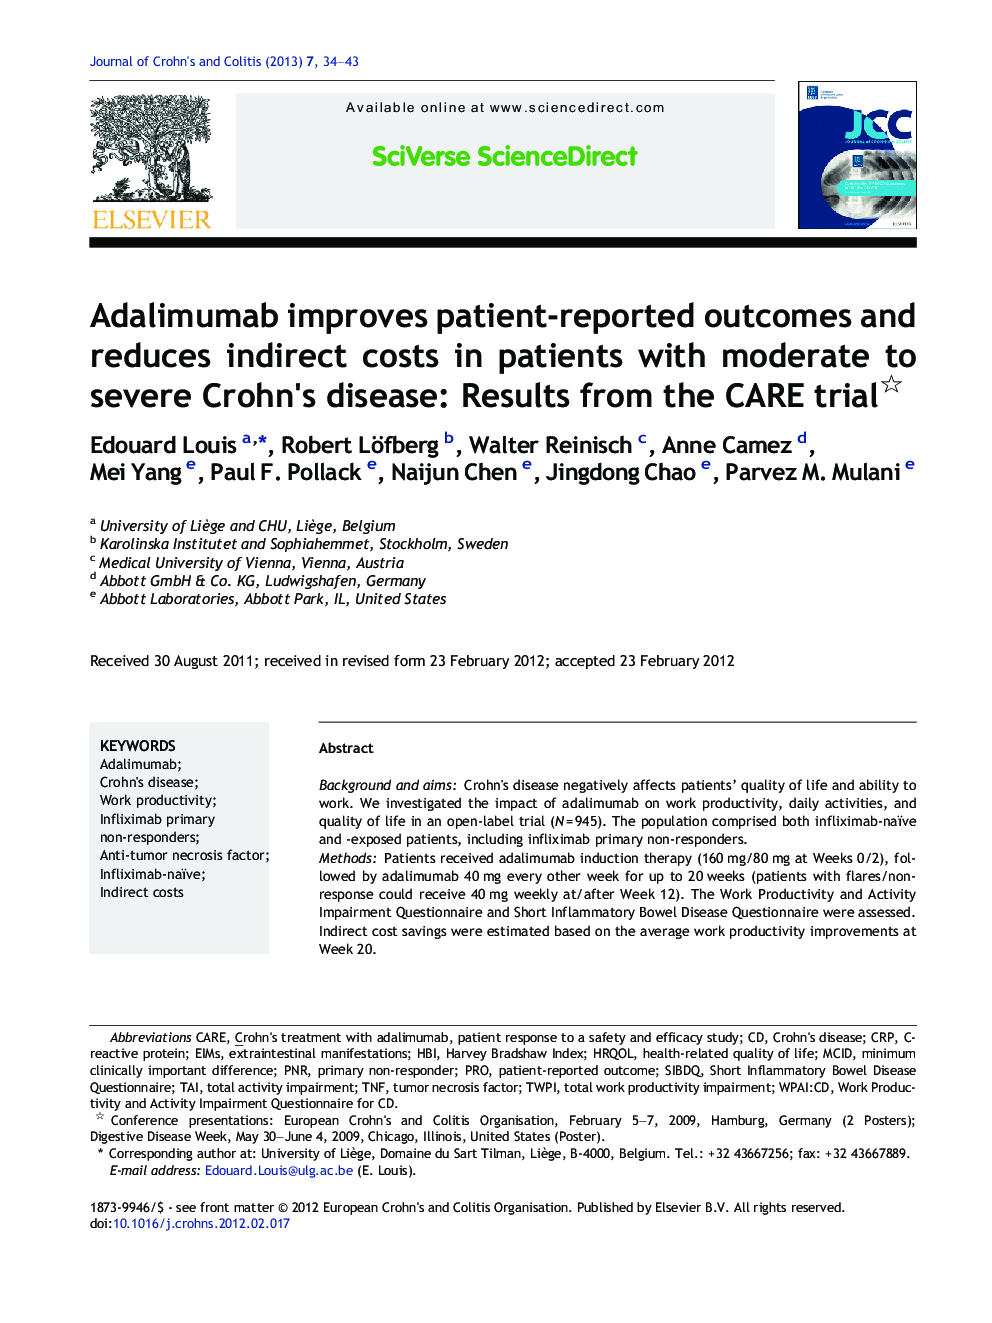 Adalimumab improves patient-reported outcomes and reduces indirect costs in patients with moderate to severe Crohn's disease: Results from the CARE trial